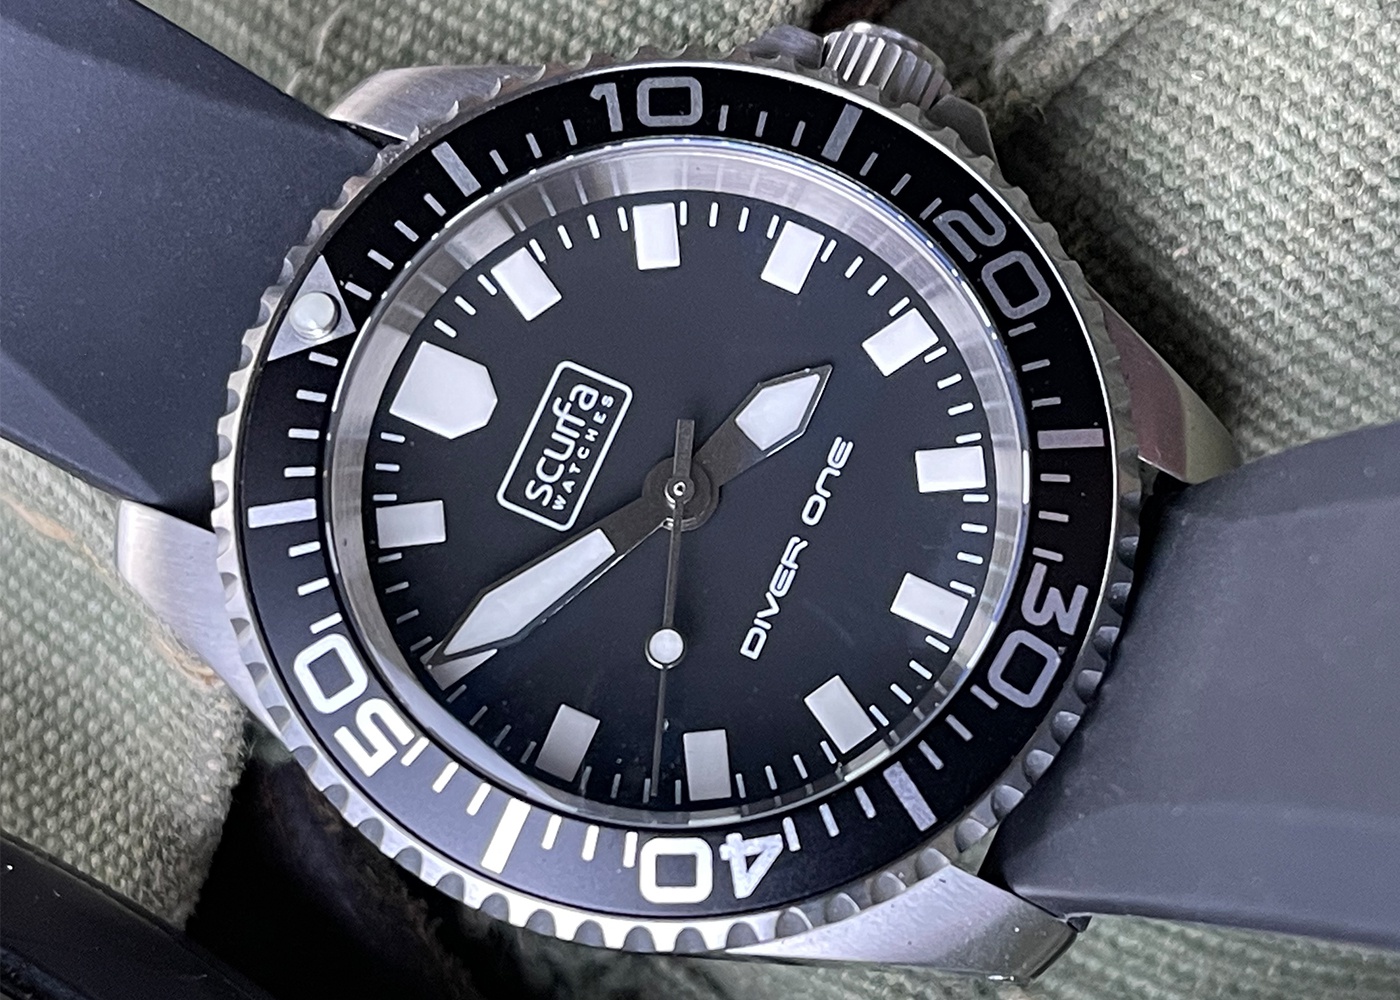 LTD ETD SCURFA FOR GRAHAME FOWLER DIVER ONE MS 20 nyc